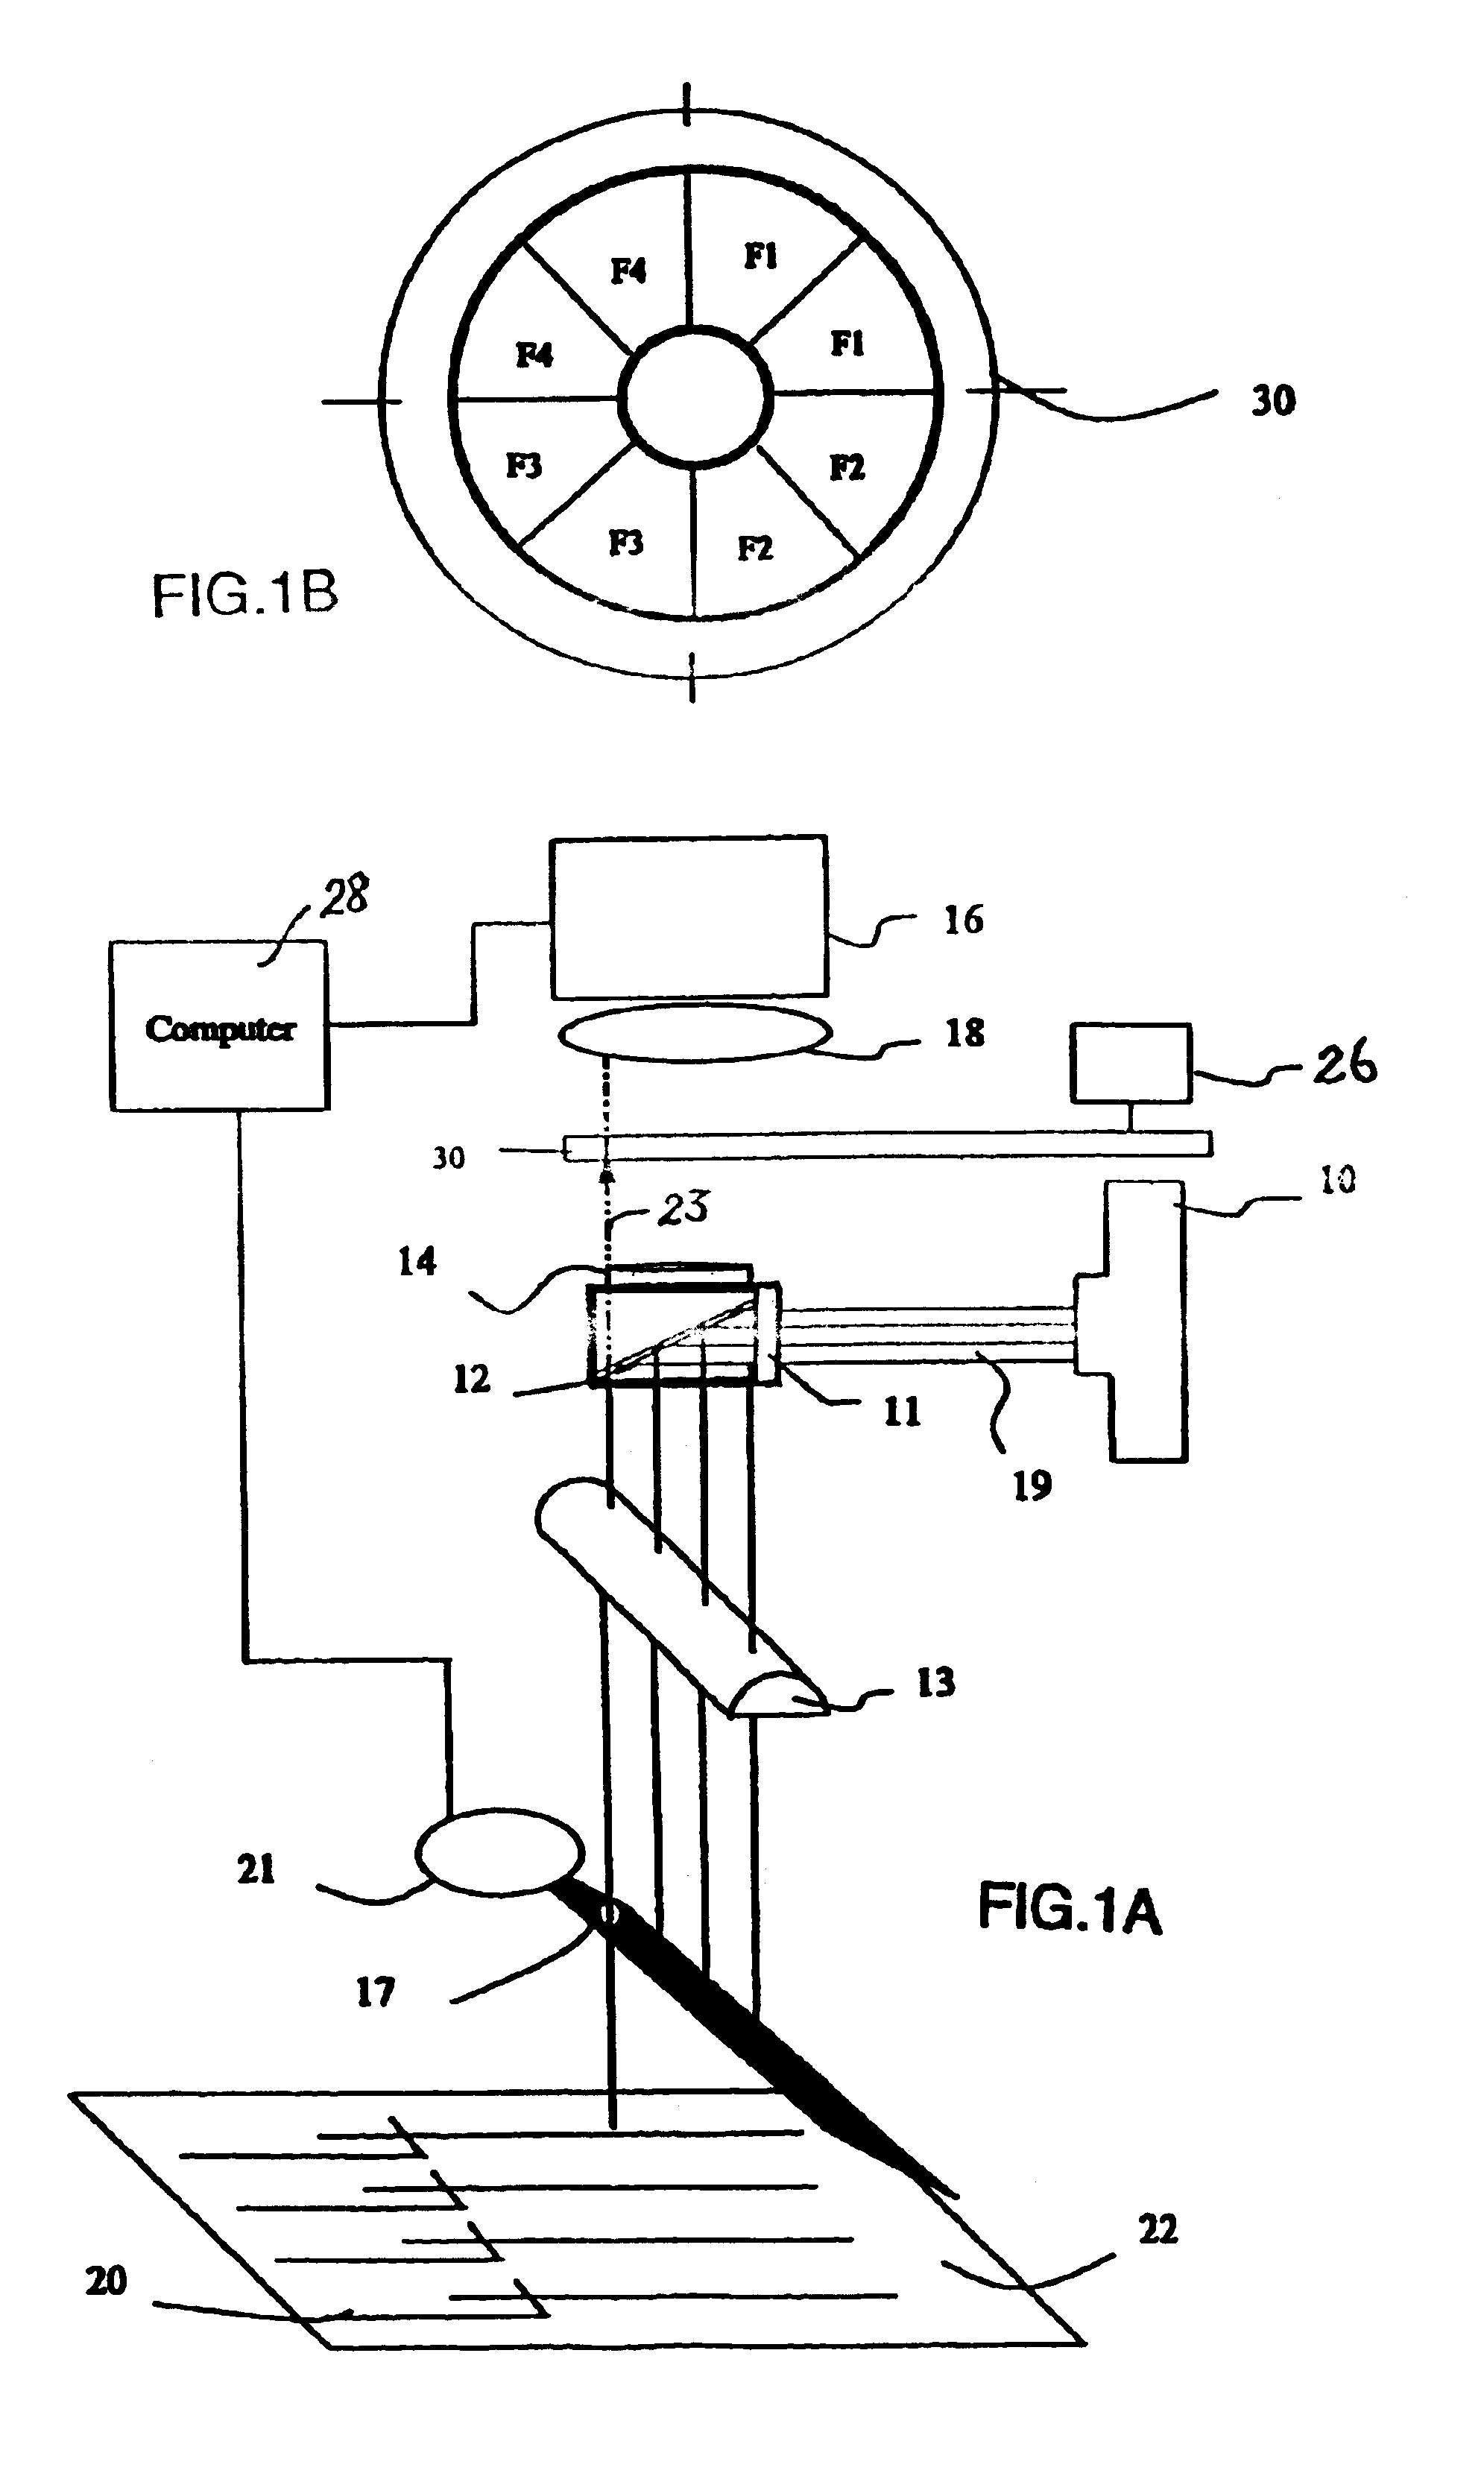 Optical detection system